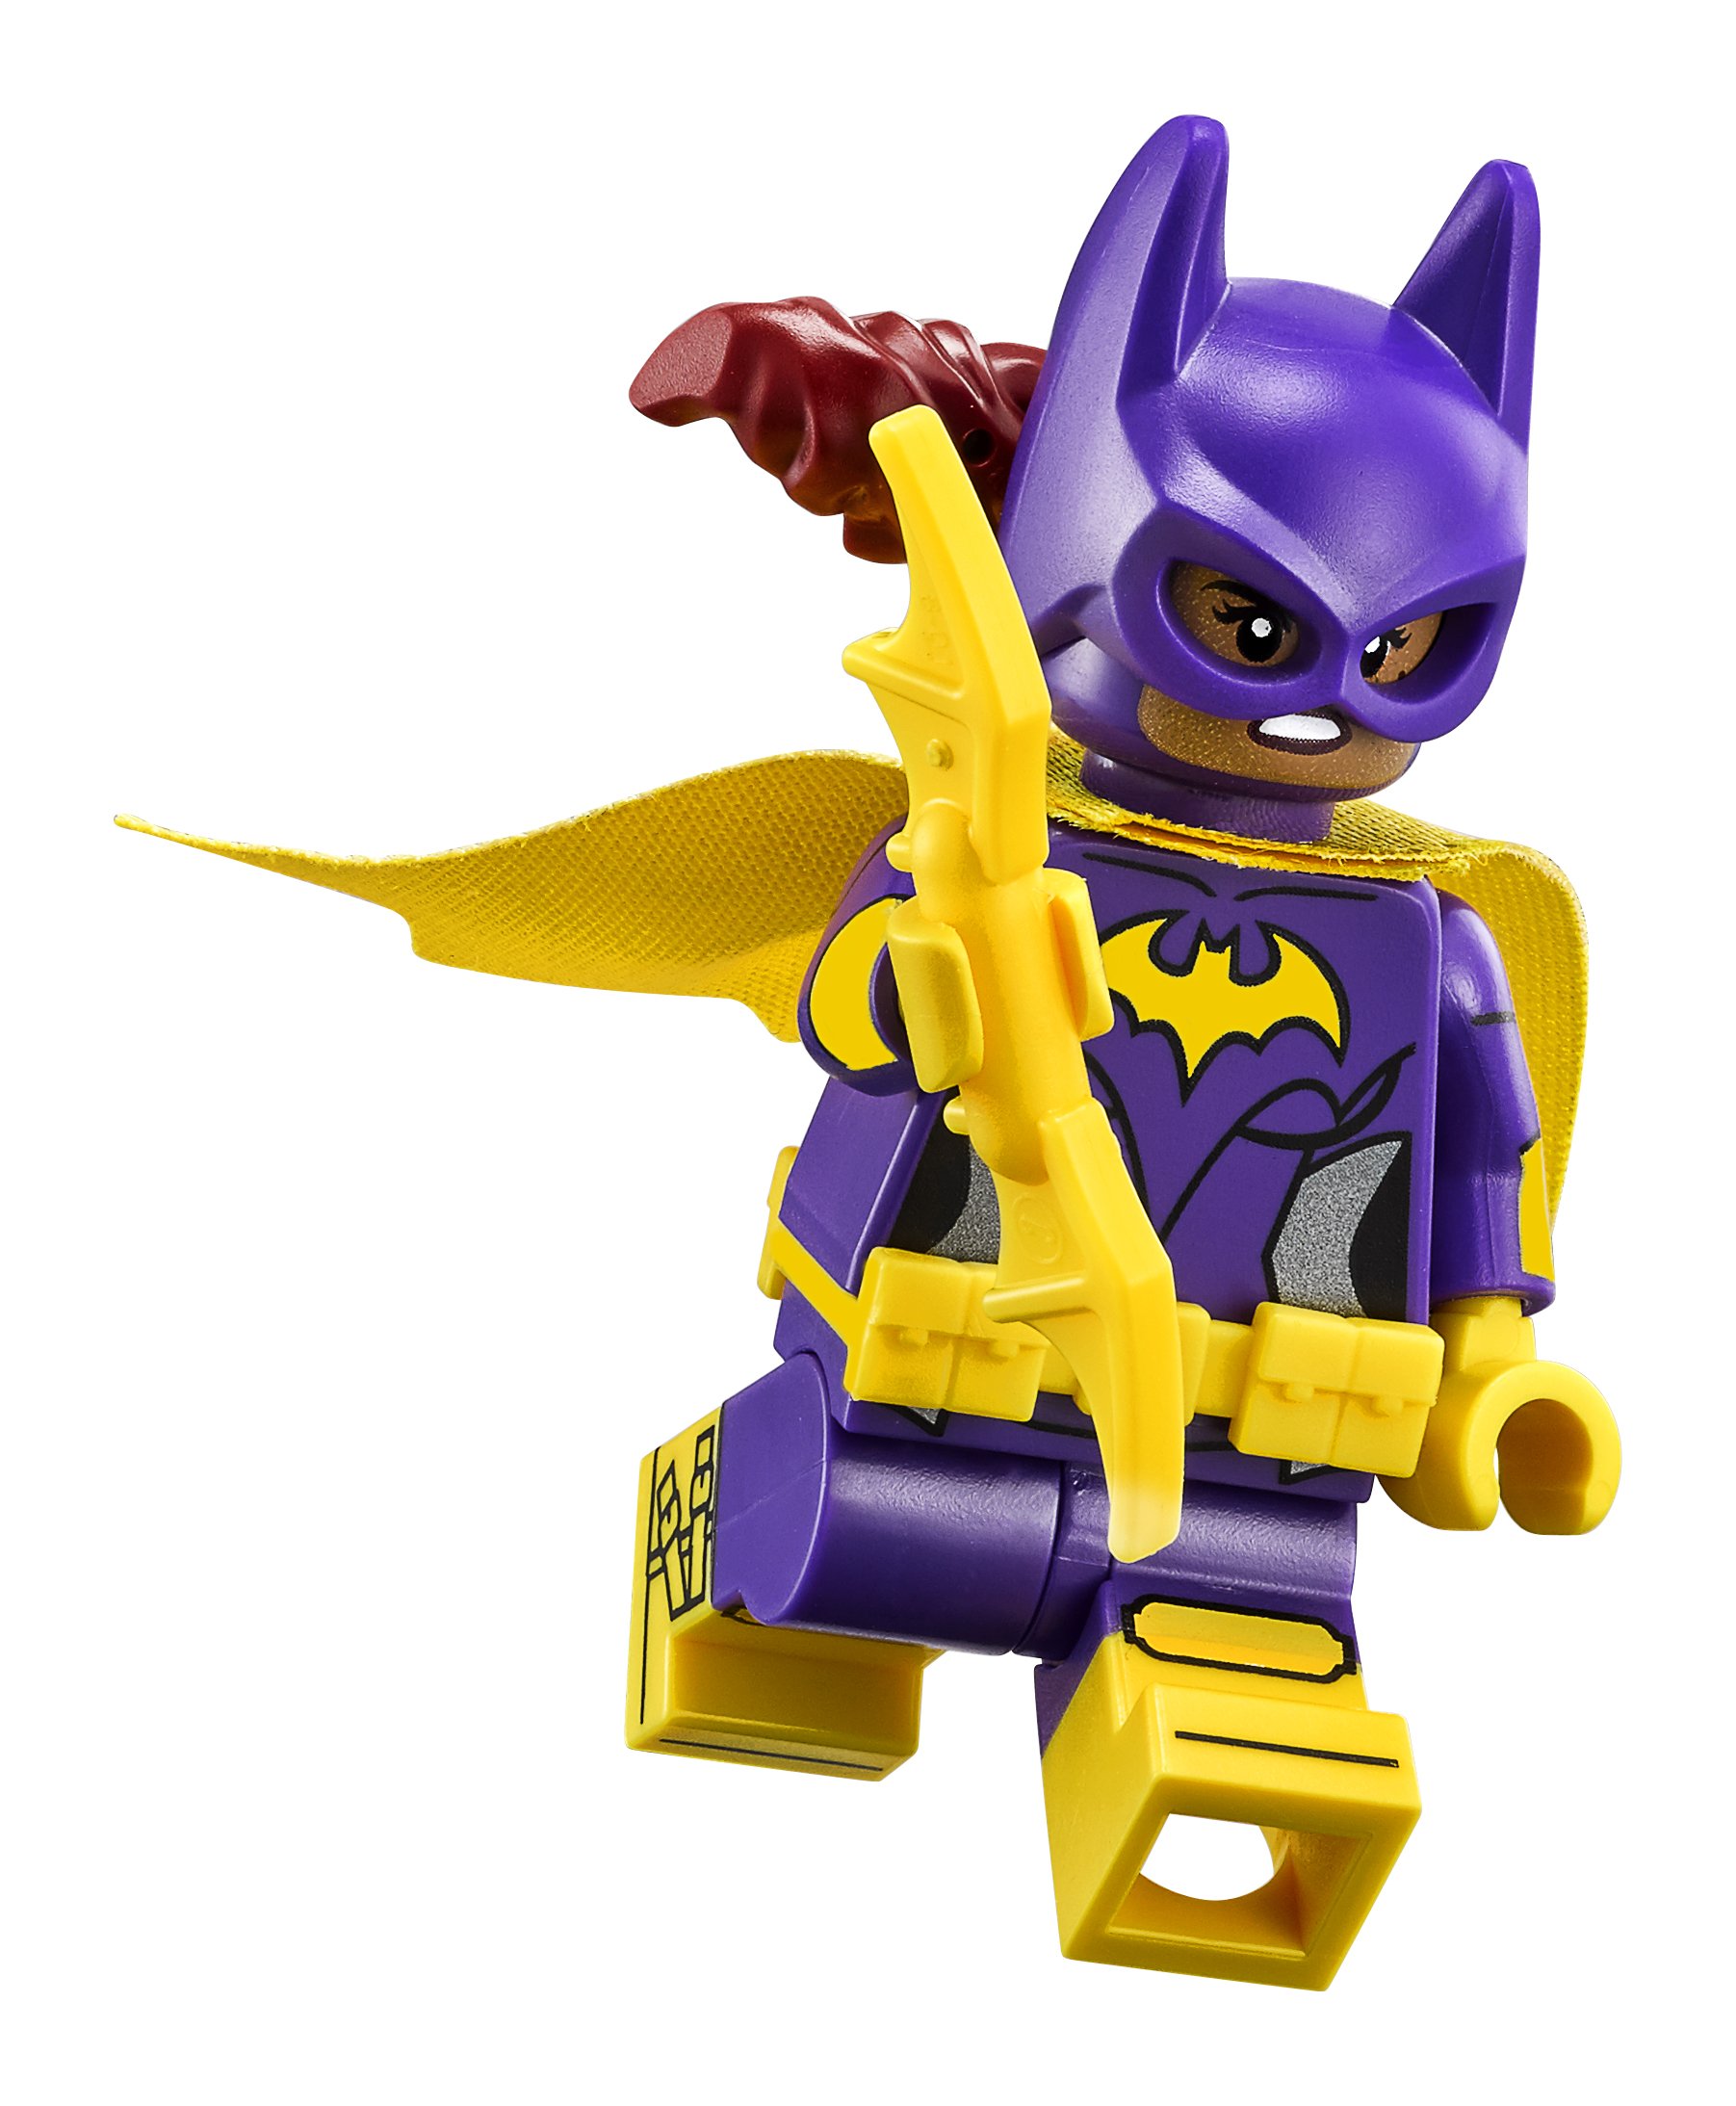 The LEGO Batman Movie - Catwoman Catcycle Chase (70902) 